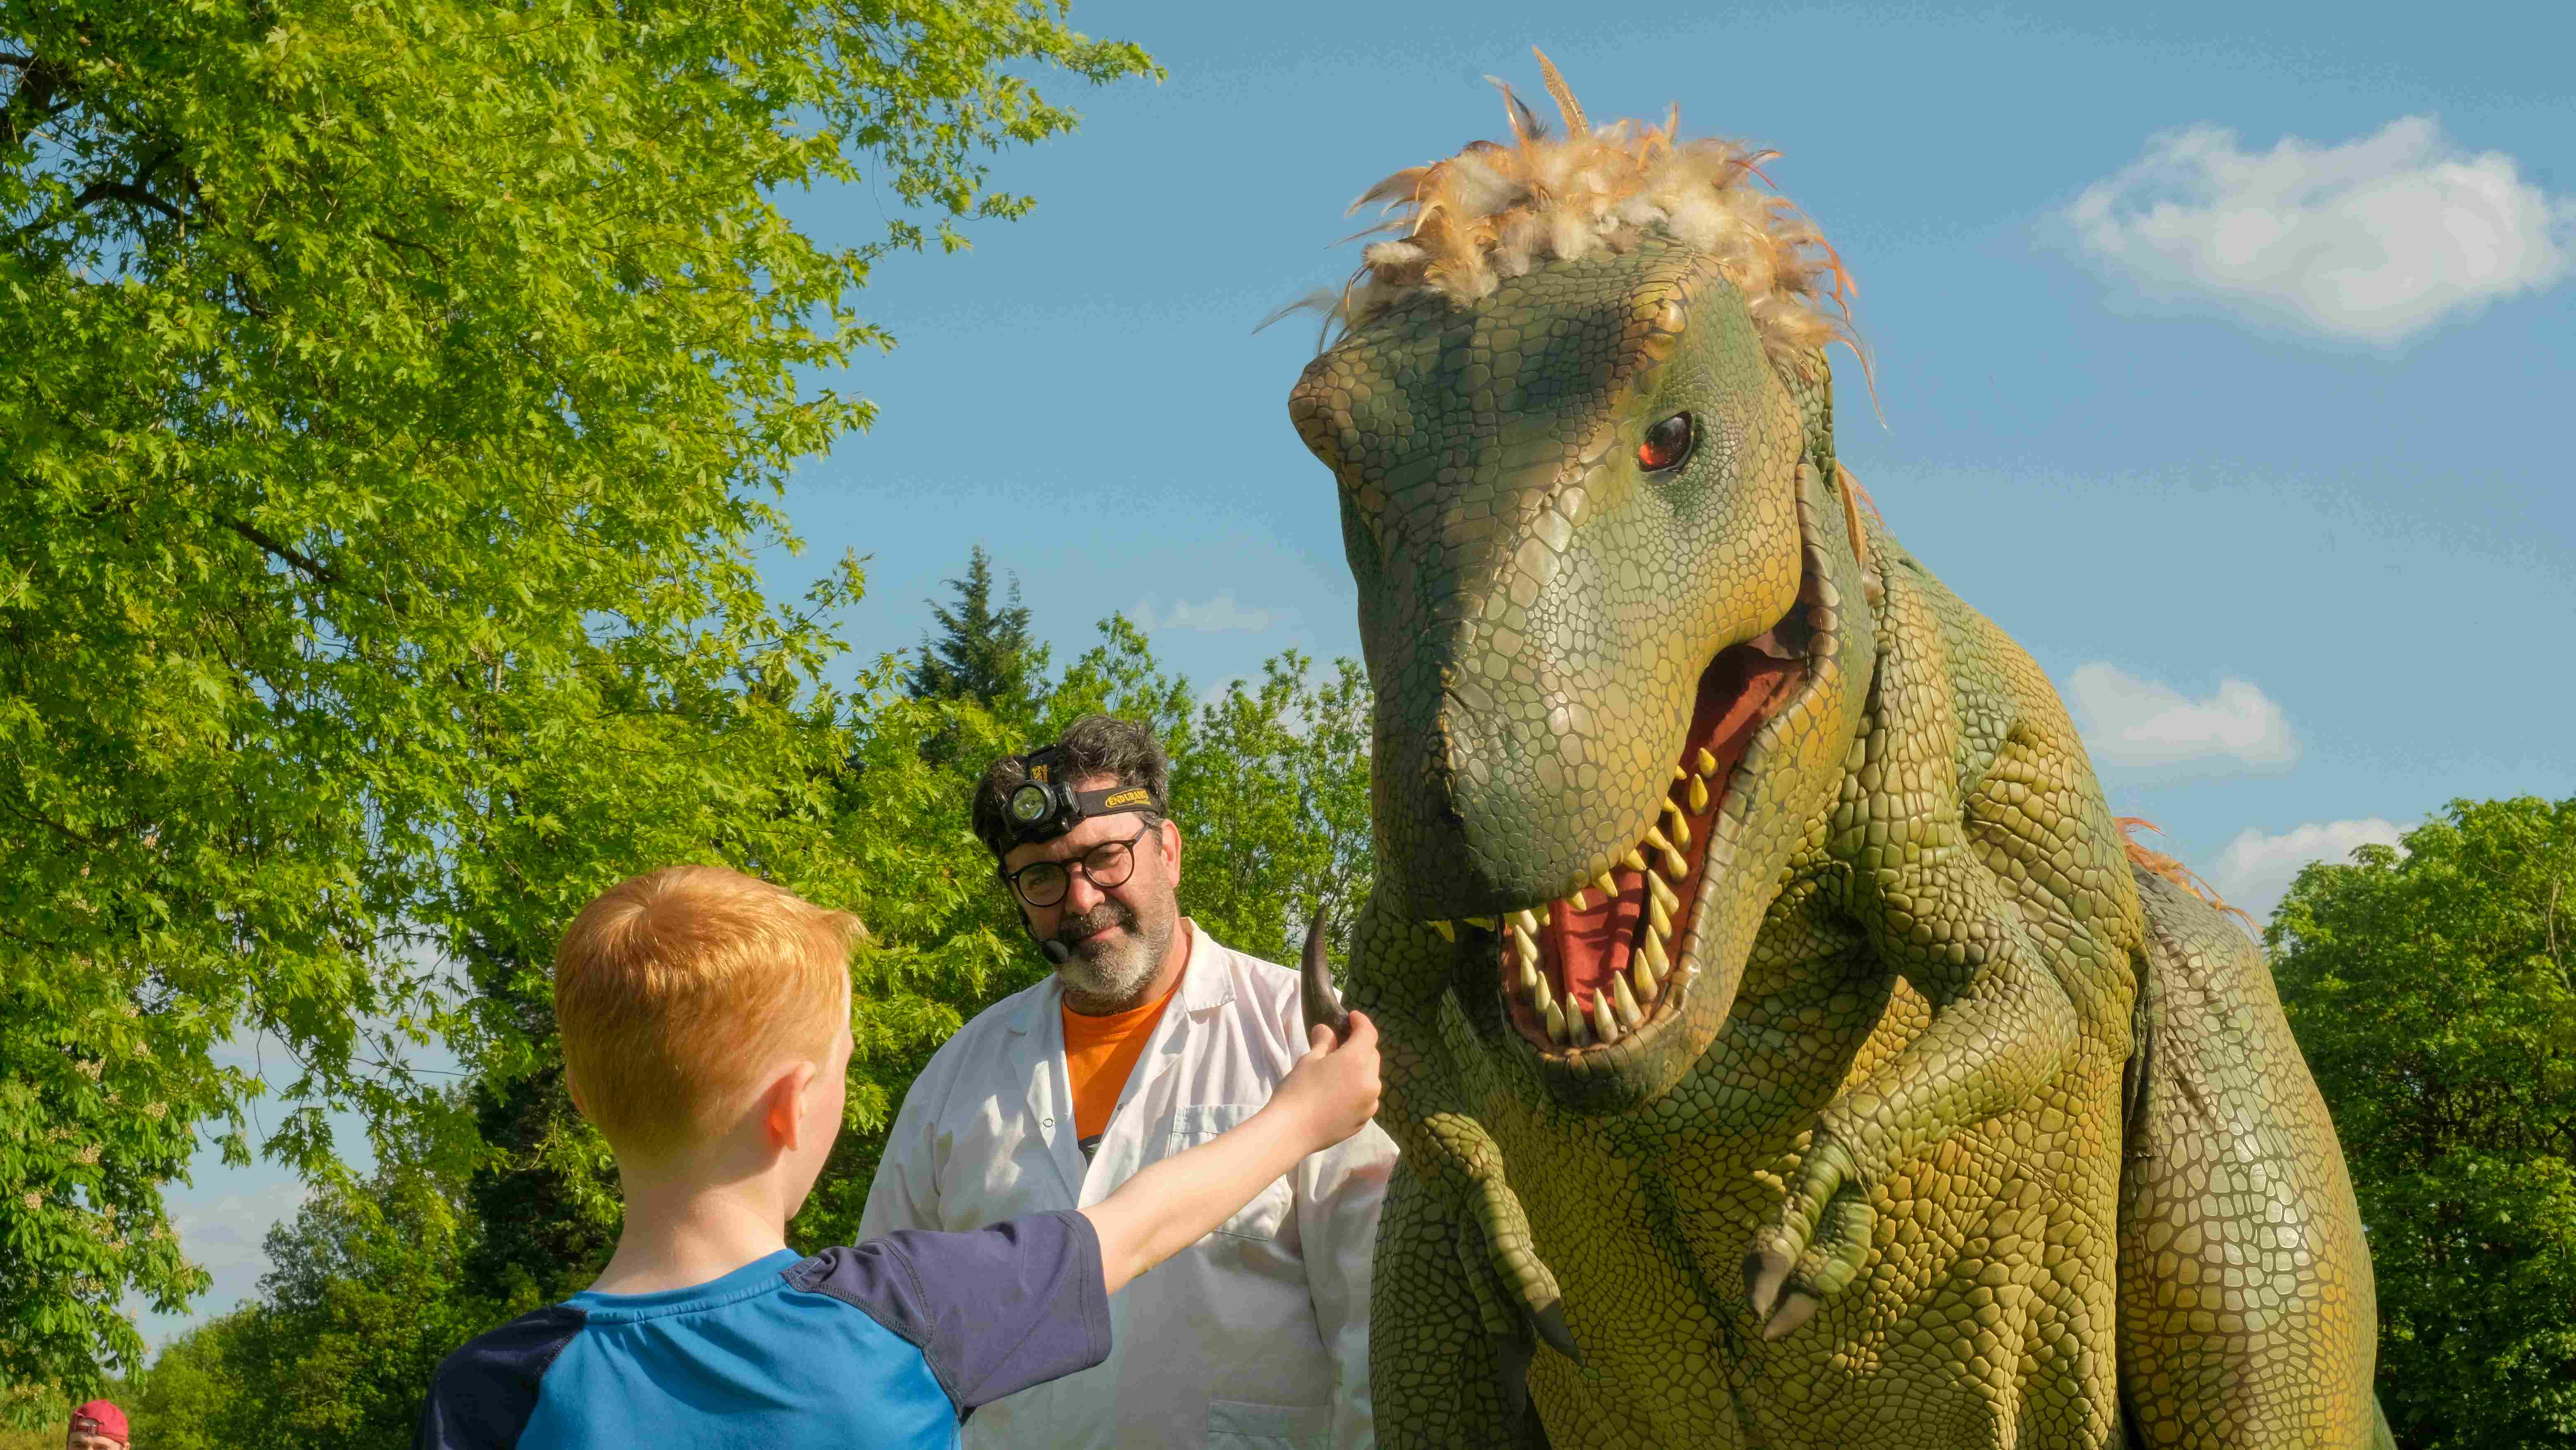 Meet giant dinosaur at launch of new ‘Magical Beasts’ Sculpture Trail